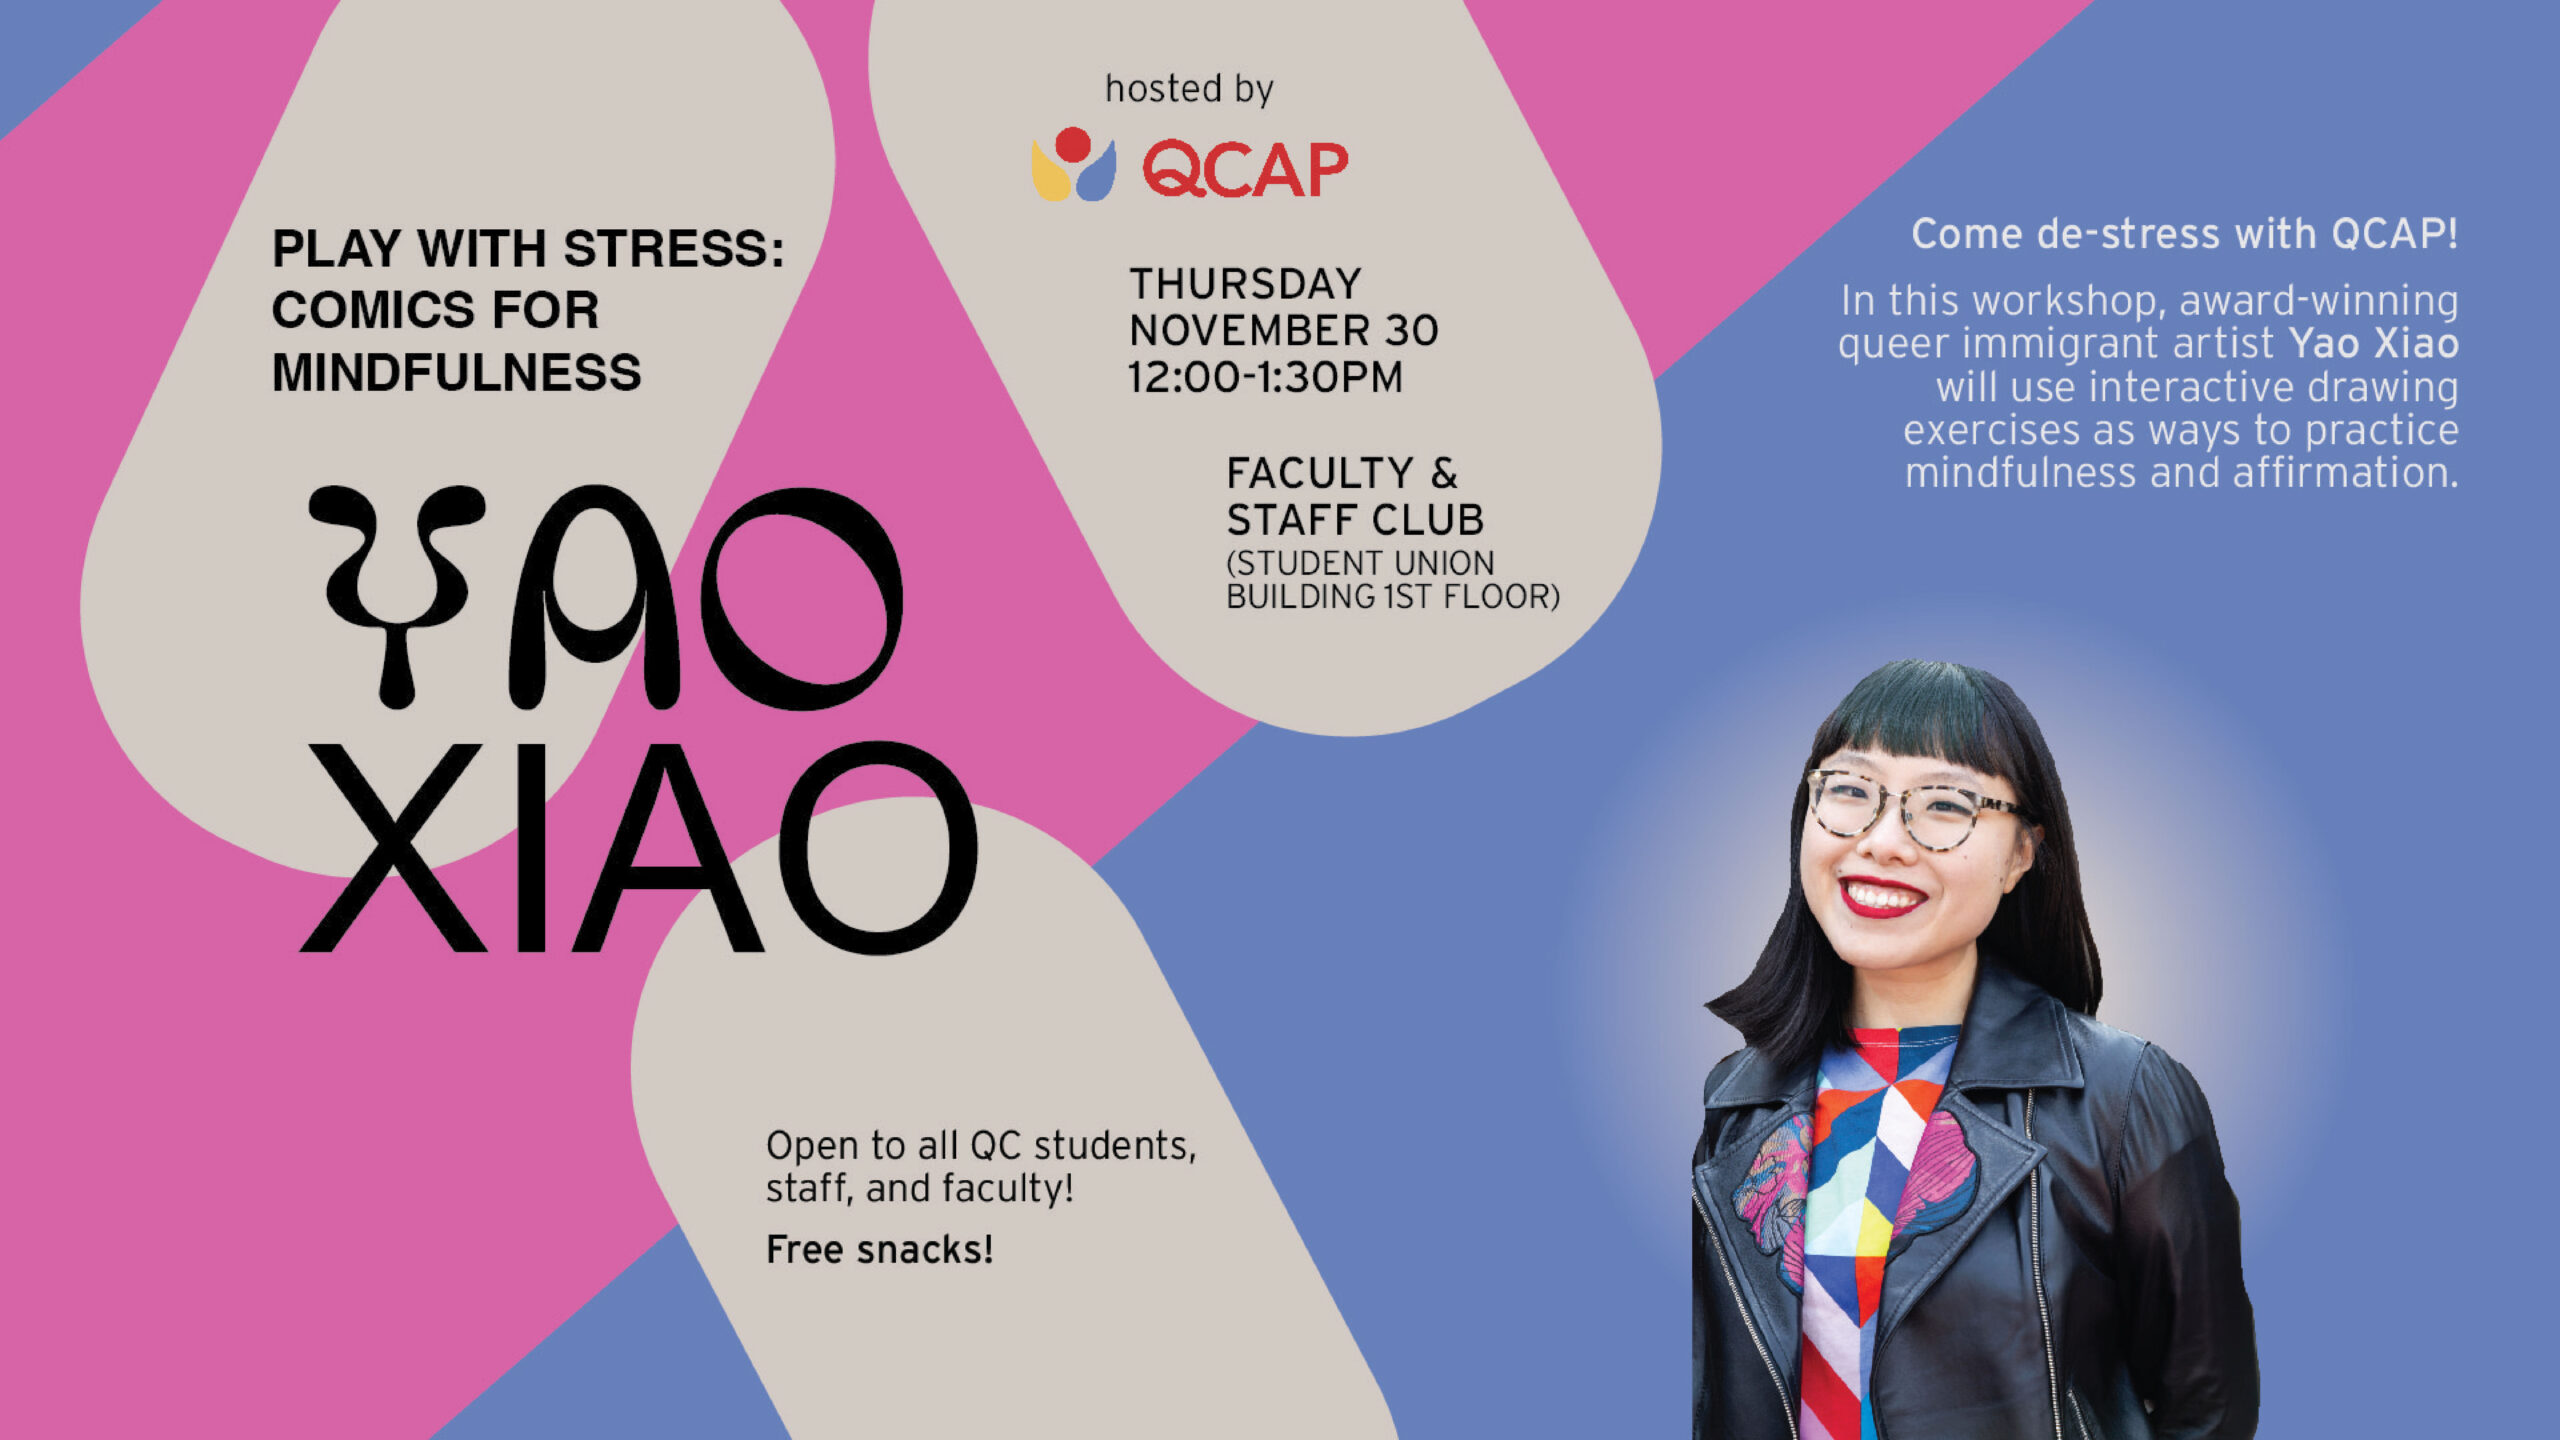 Flyer with information on the Play with Stress: Comics for Mindfulness mental health workshop event at the Student Union building. Flyer has a magenta, indigo background with a headshot of artist Yao Xiao on the bottom right corner.